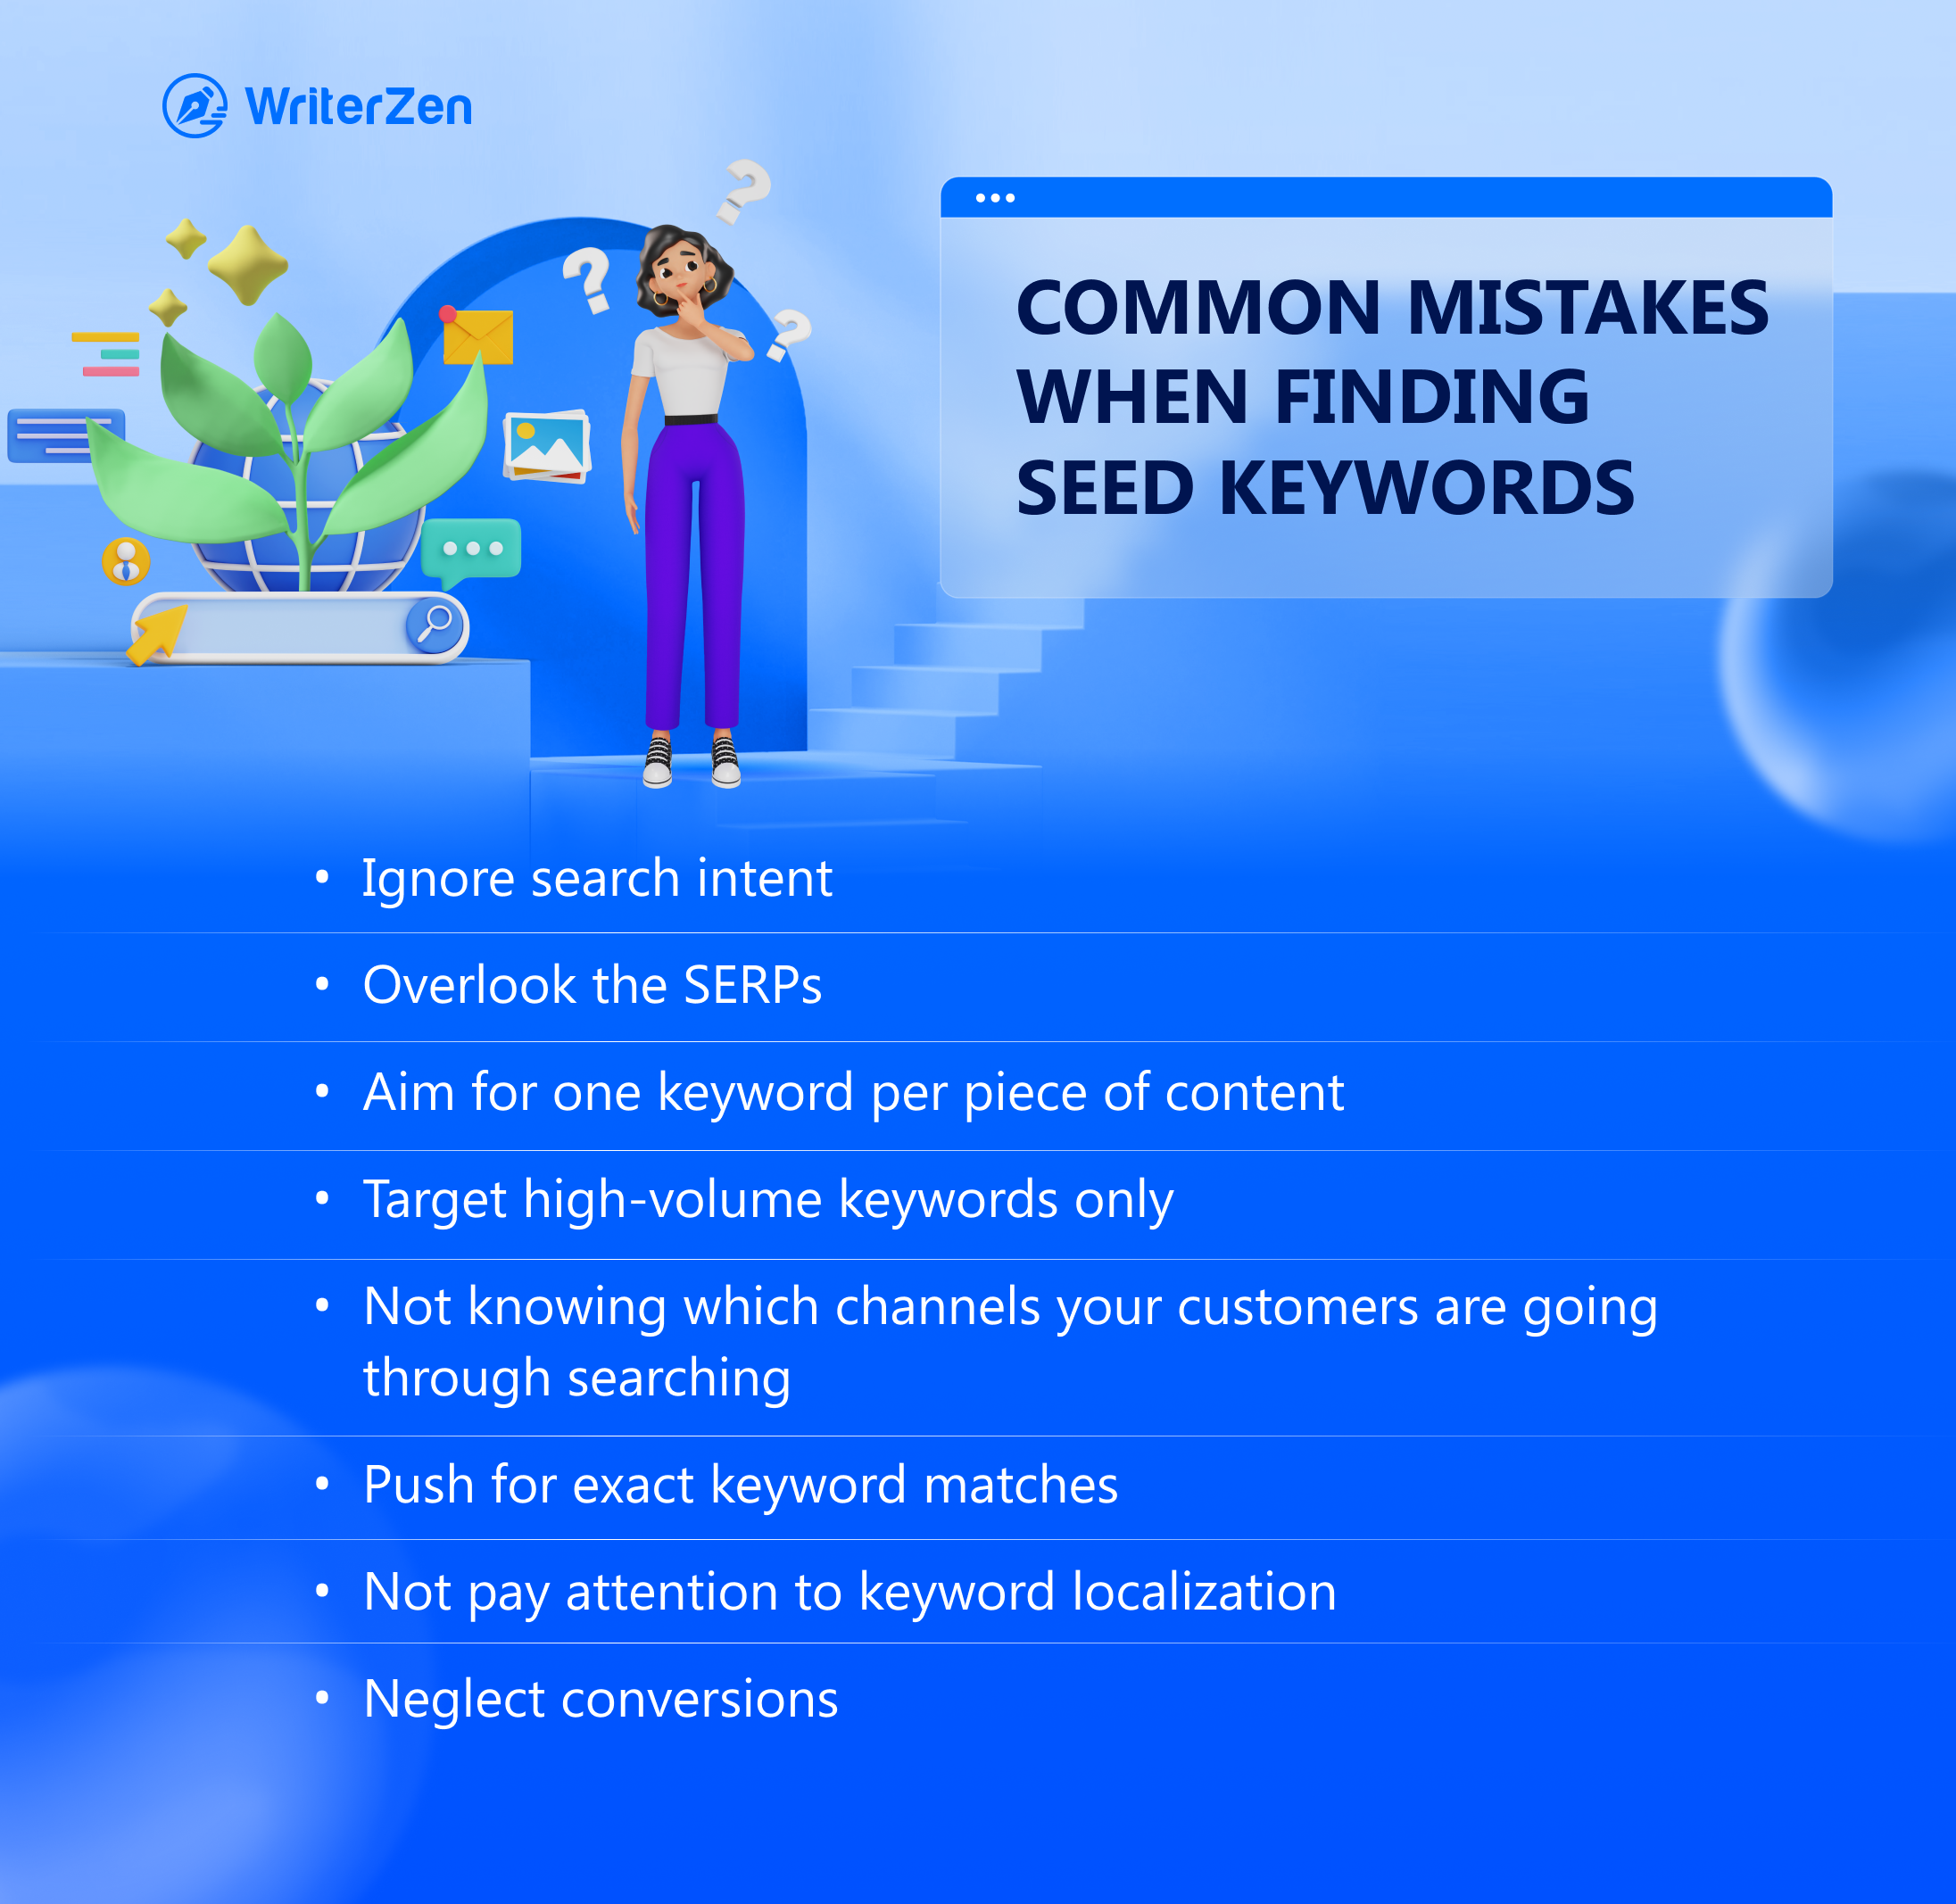 Common Mistakes when Finding Seed Keywords